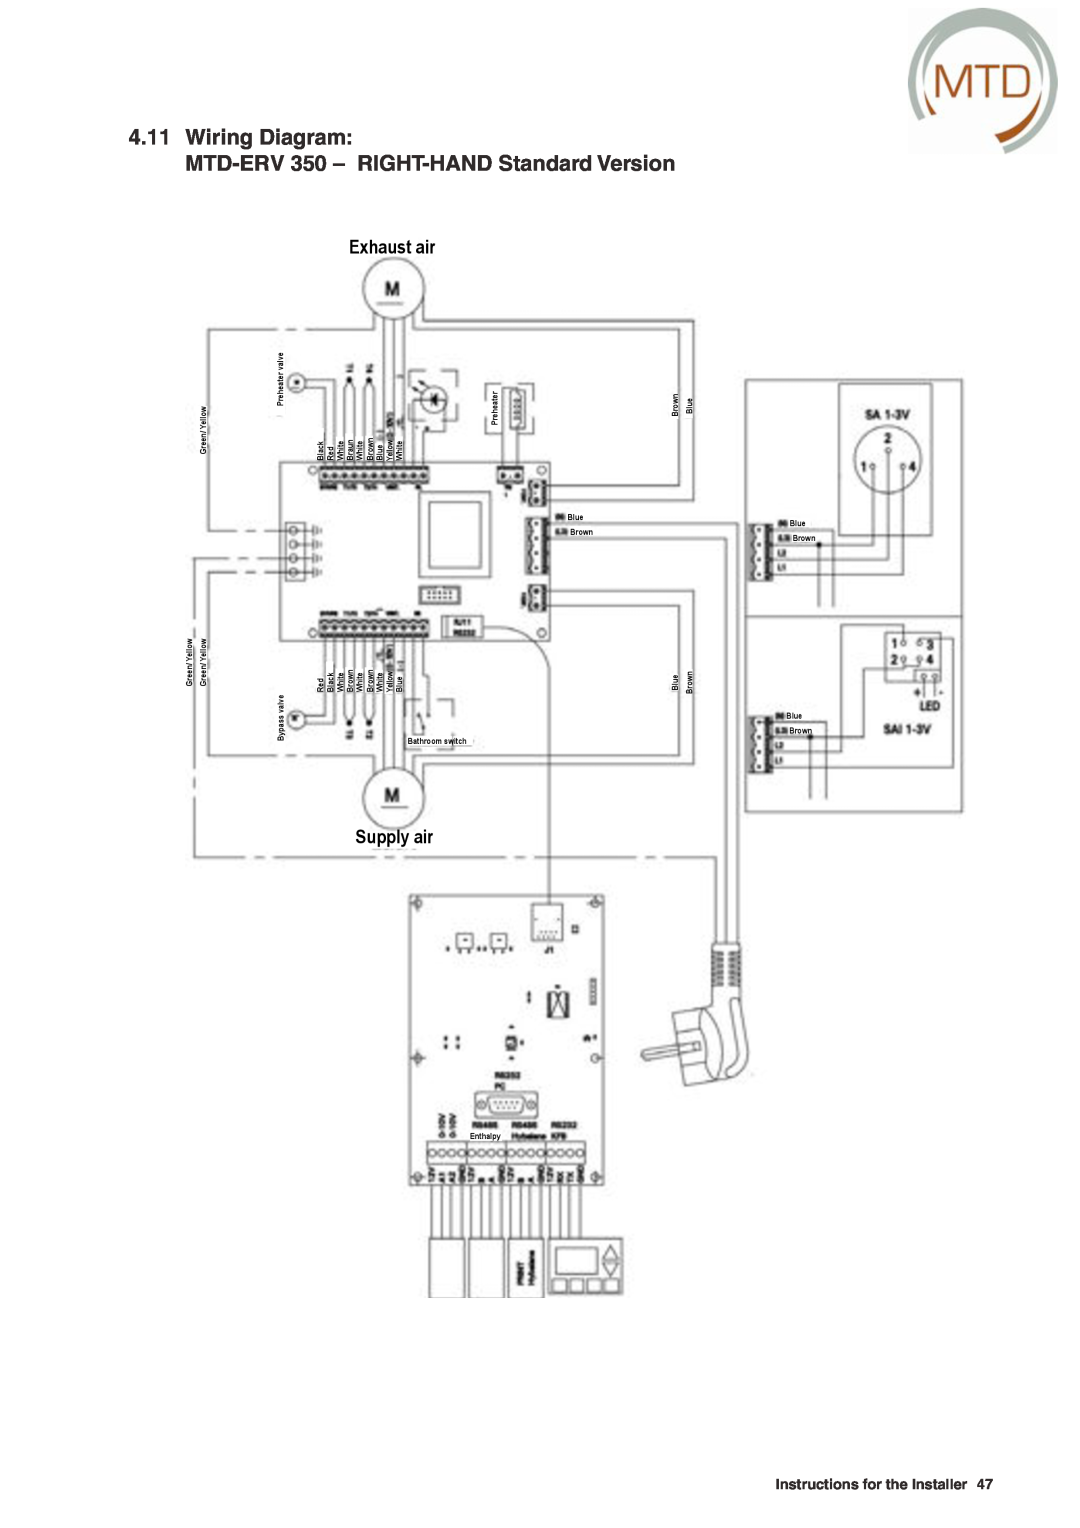 MTD Wiring Diagram MTD-ERV 350 - RIGHT-HAND Standard Version, Exhaust air, Supply air, Instructions for the Installer 